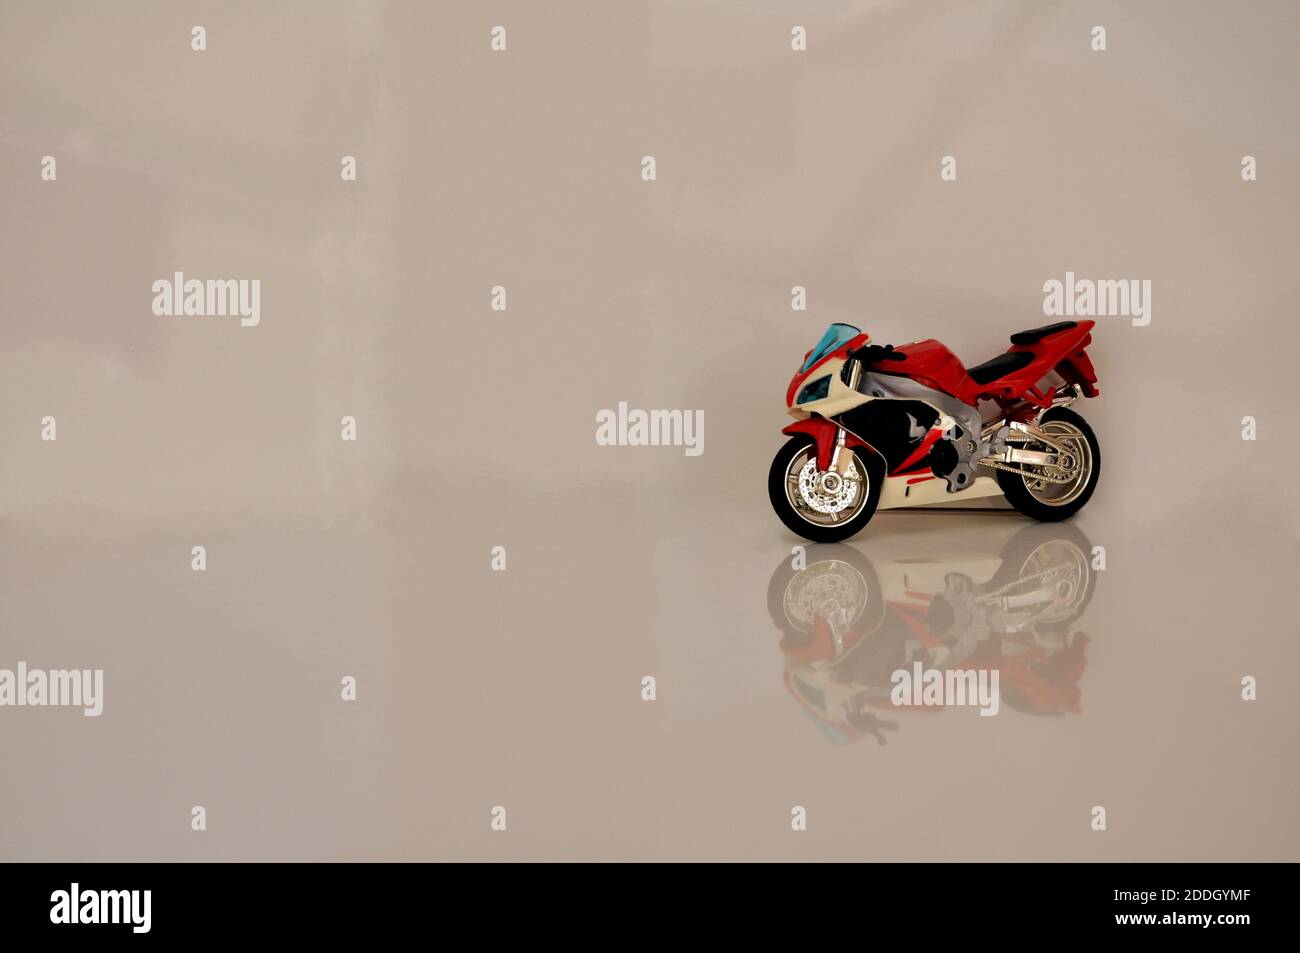 Sports motorcycle for use in racing or even in cities, known as open class in negative space in glass base Stock Photo